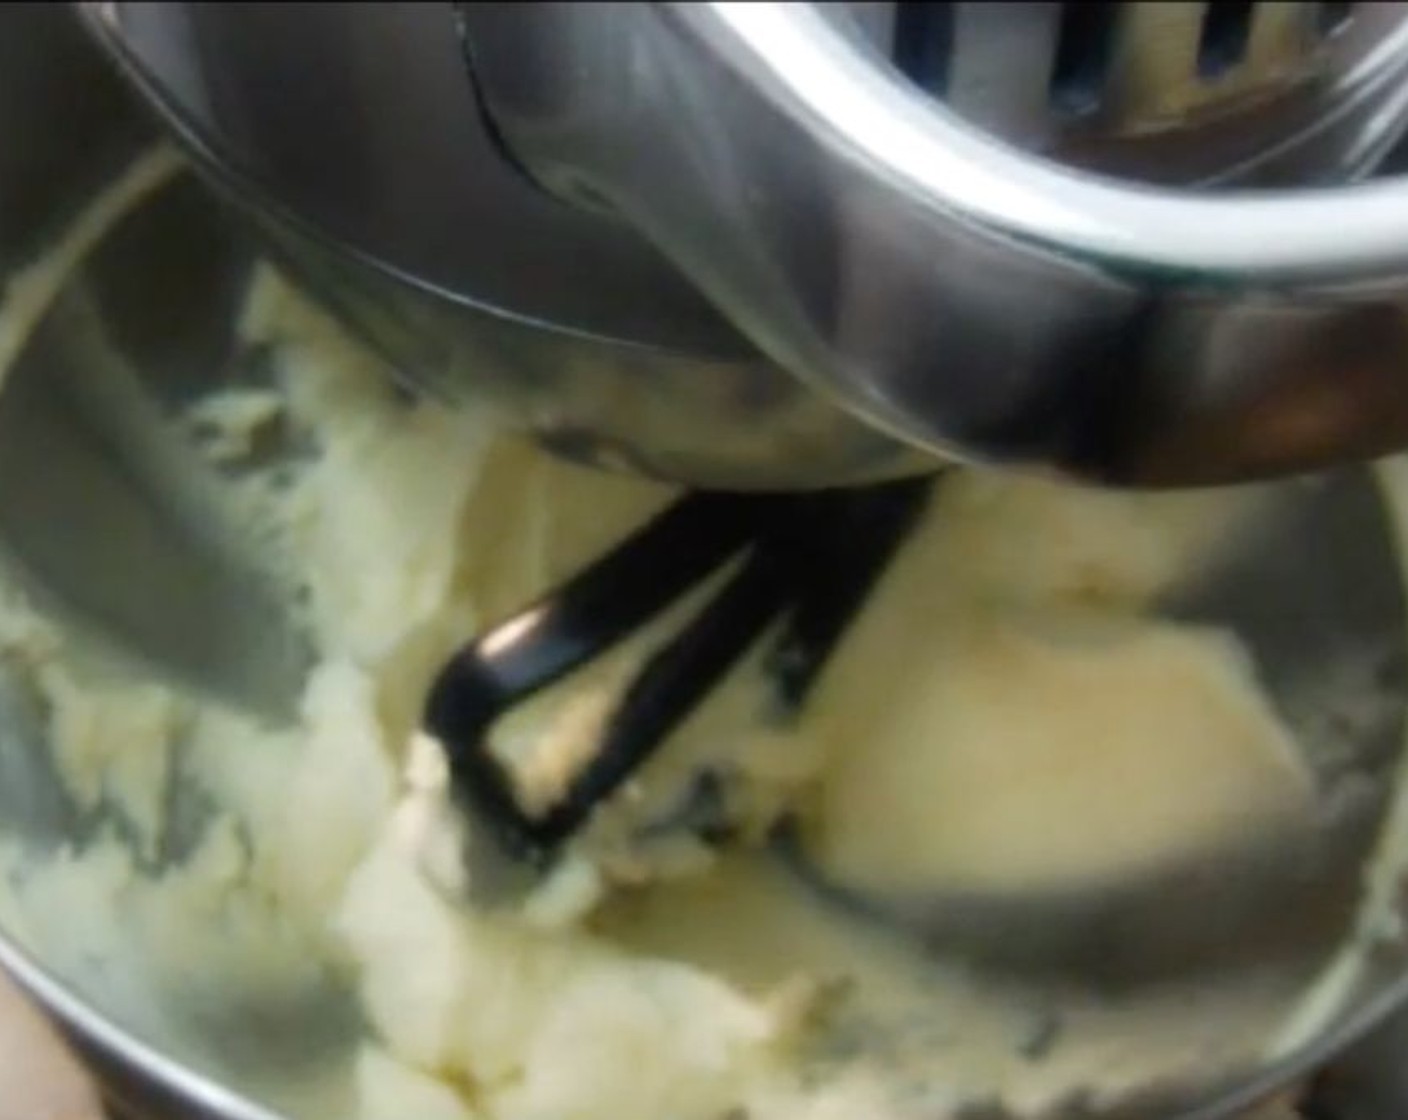 step 2 Into the bowl of a stand mixer, add Unsalted Butter (1 cup) and Granulated Sugar (1 1/2 cups). Mix until smooth.